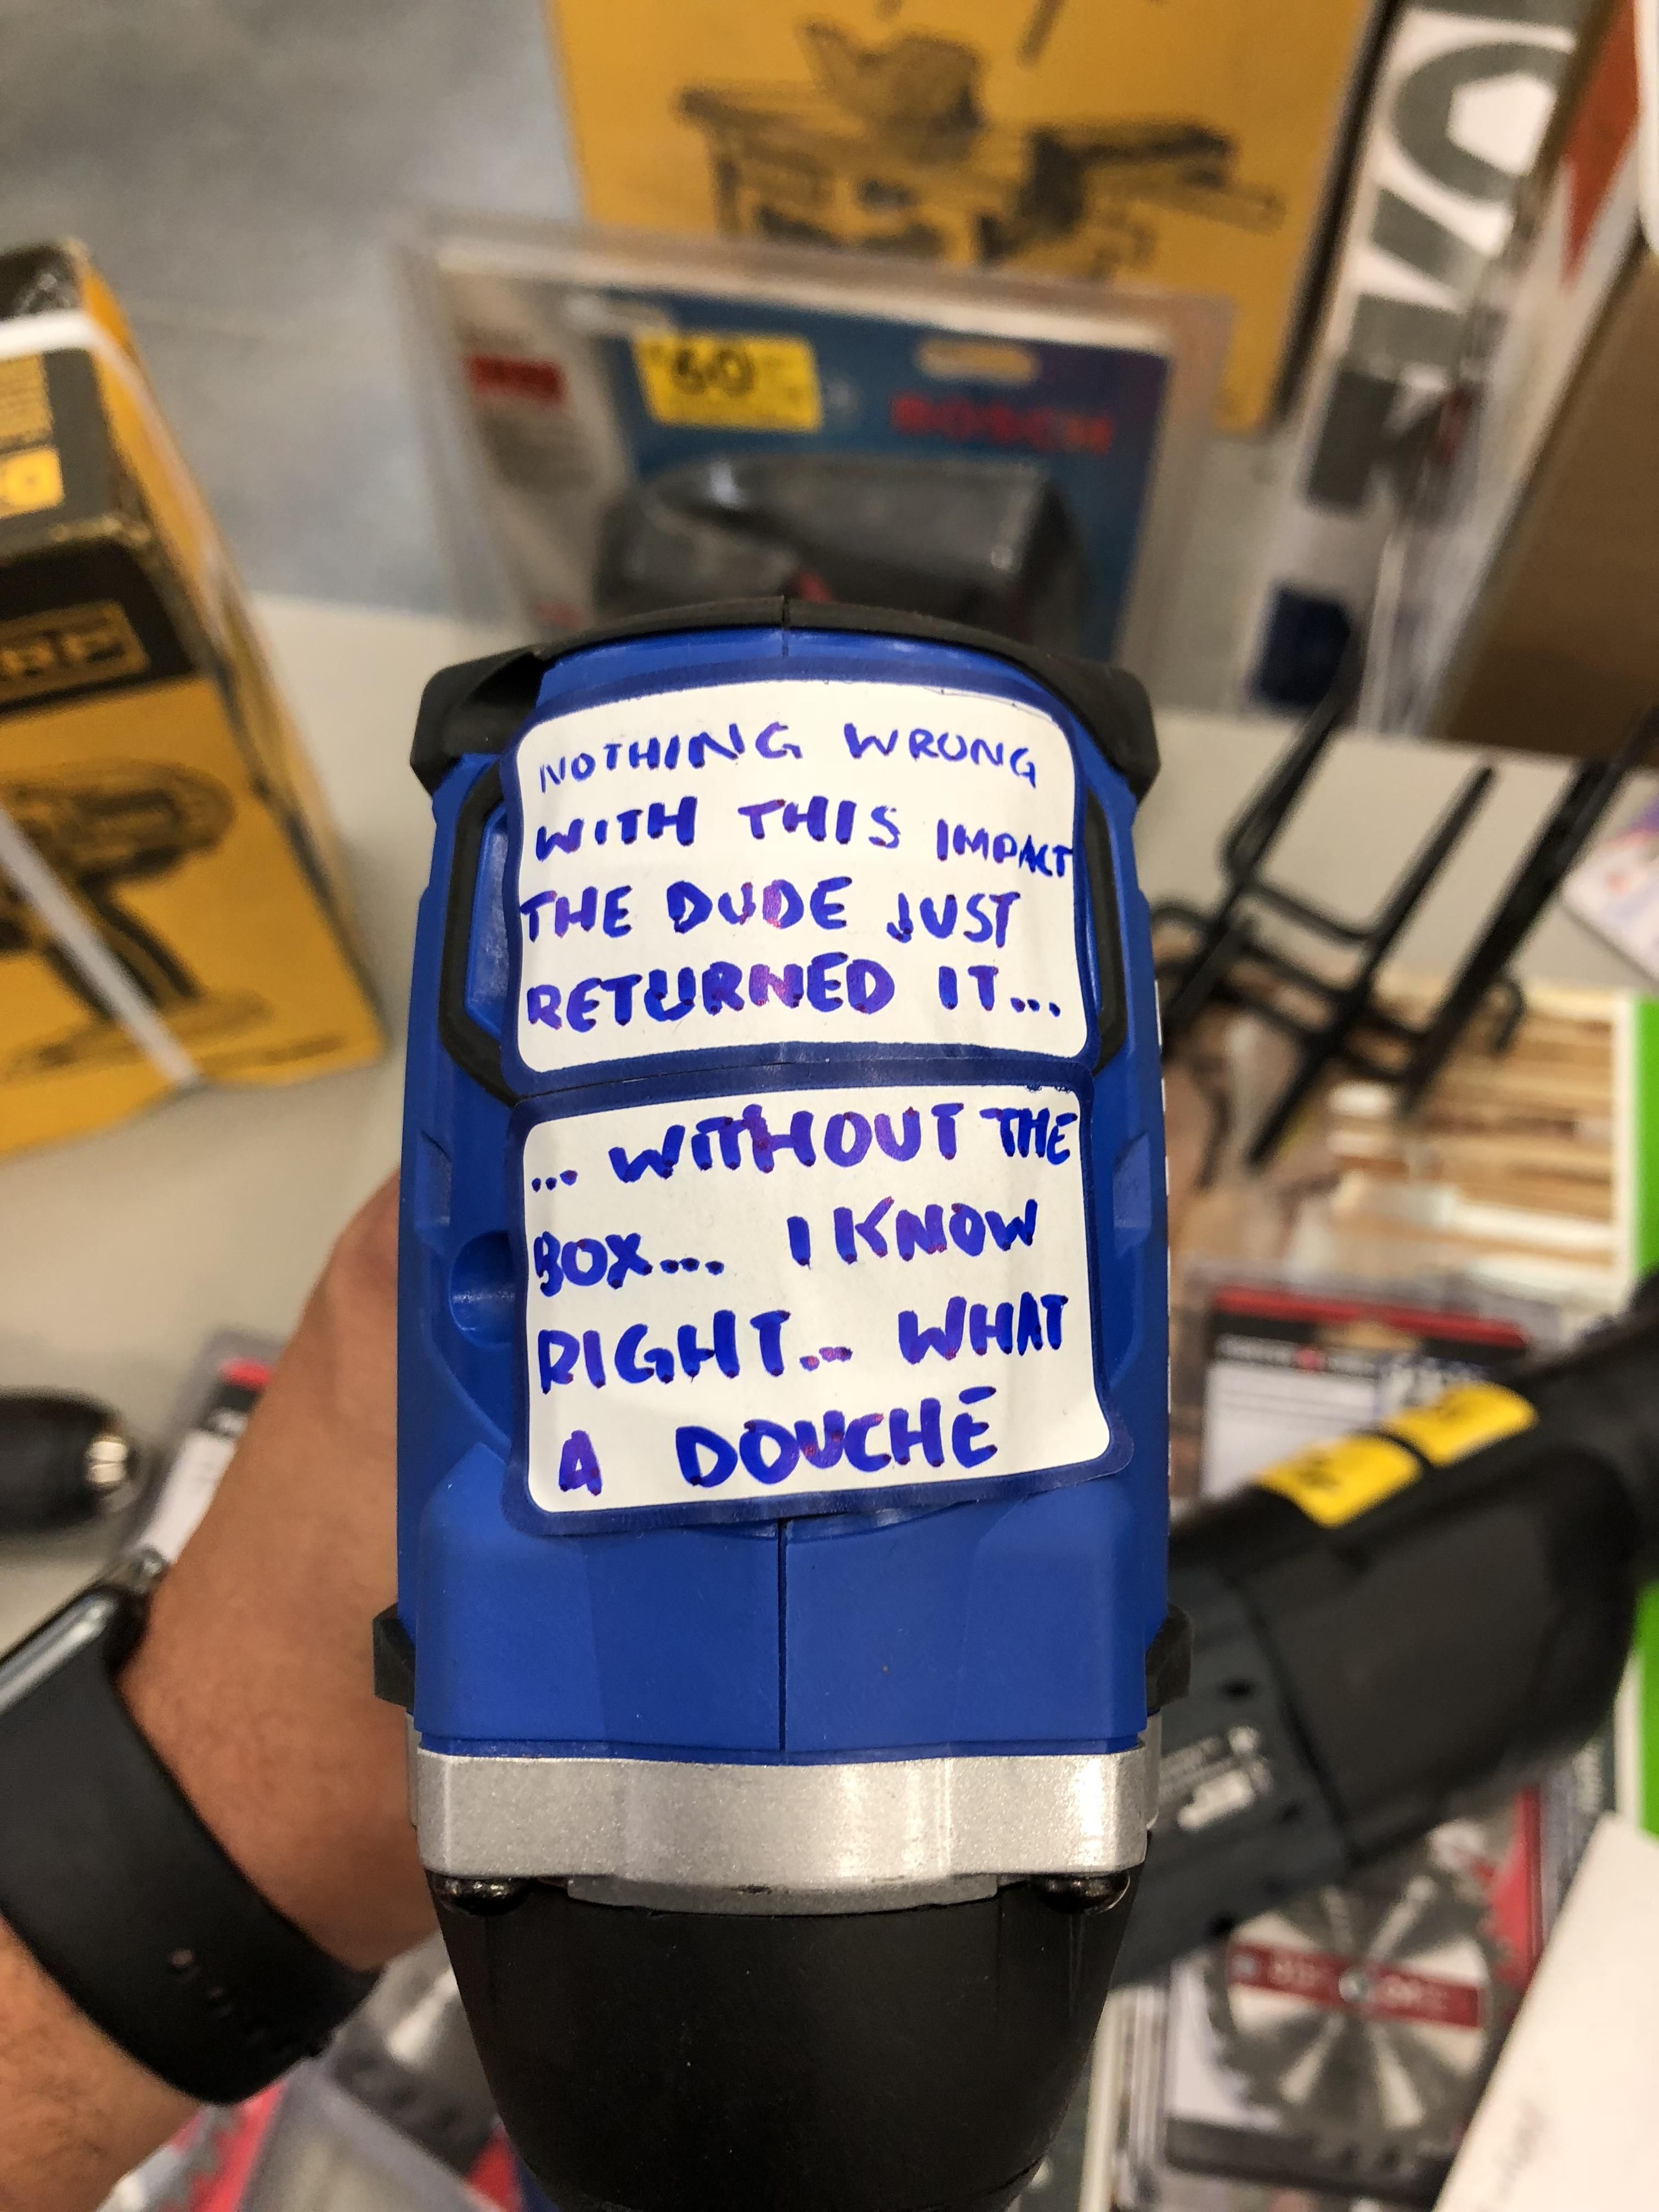 This was written on a drill that was returned to Lowe’s.